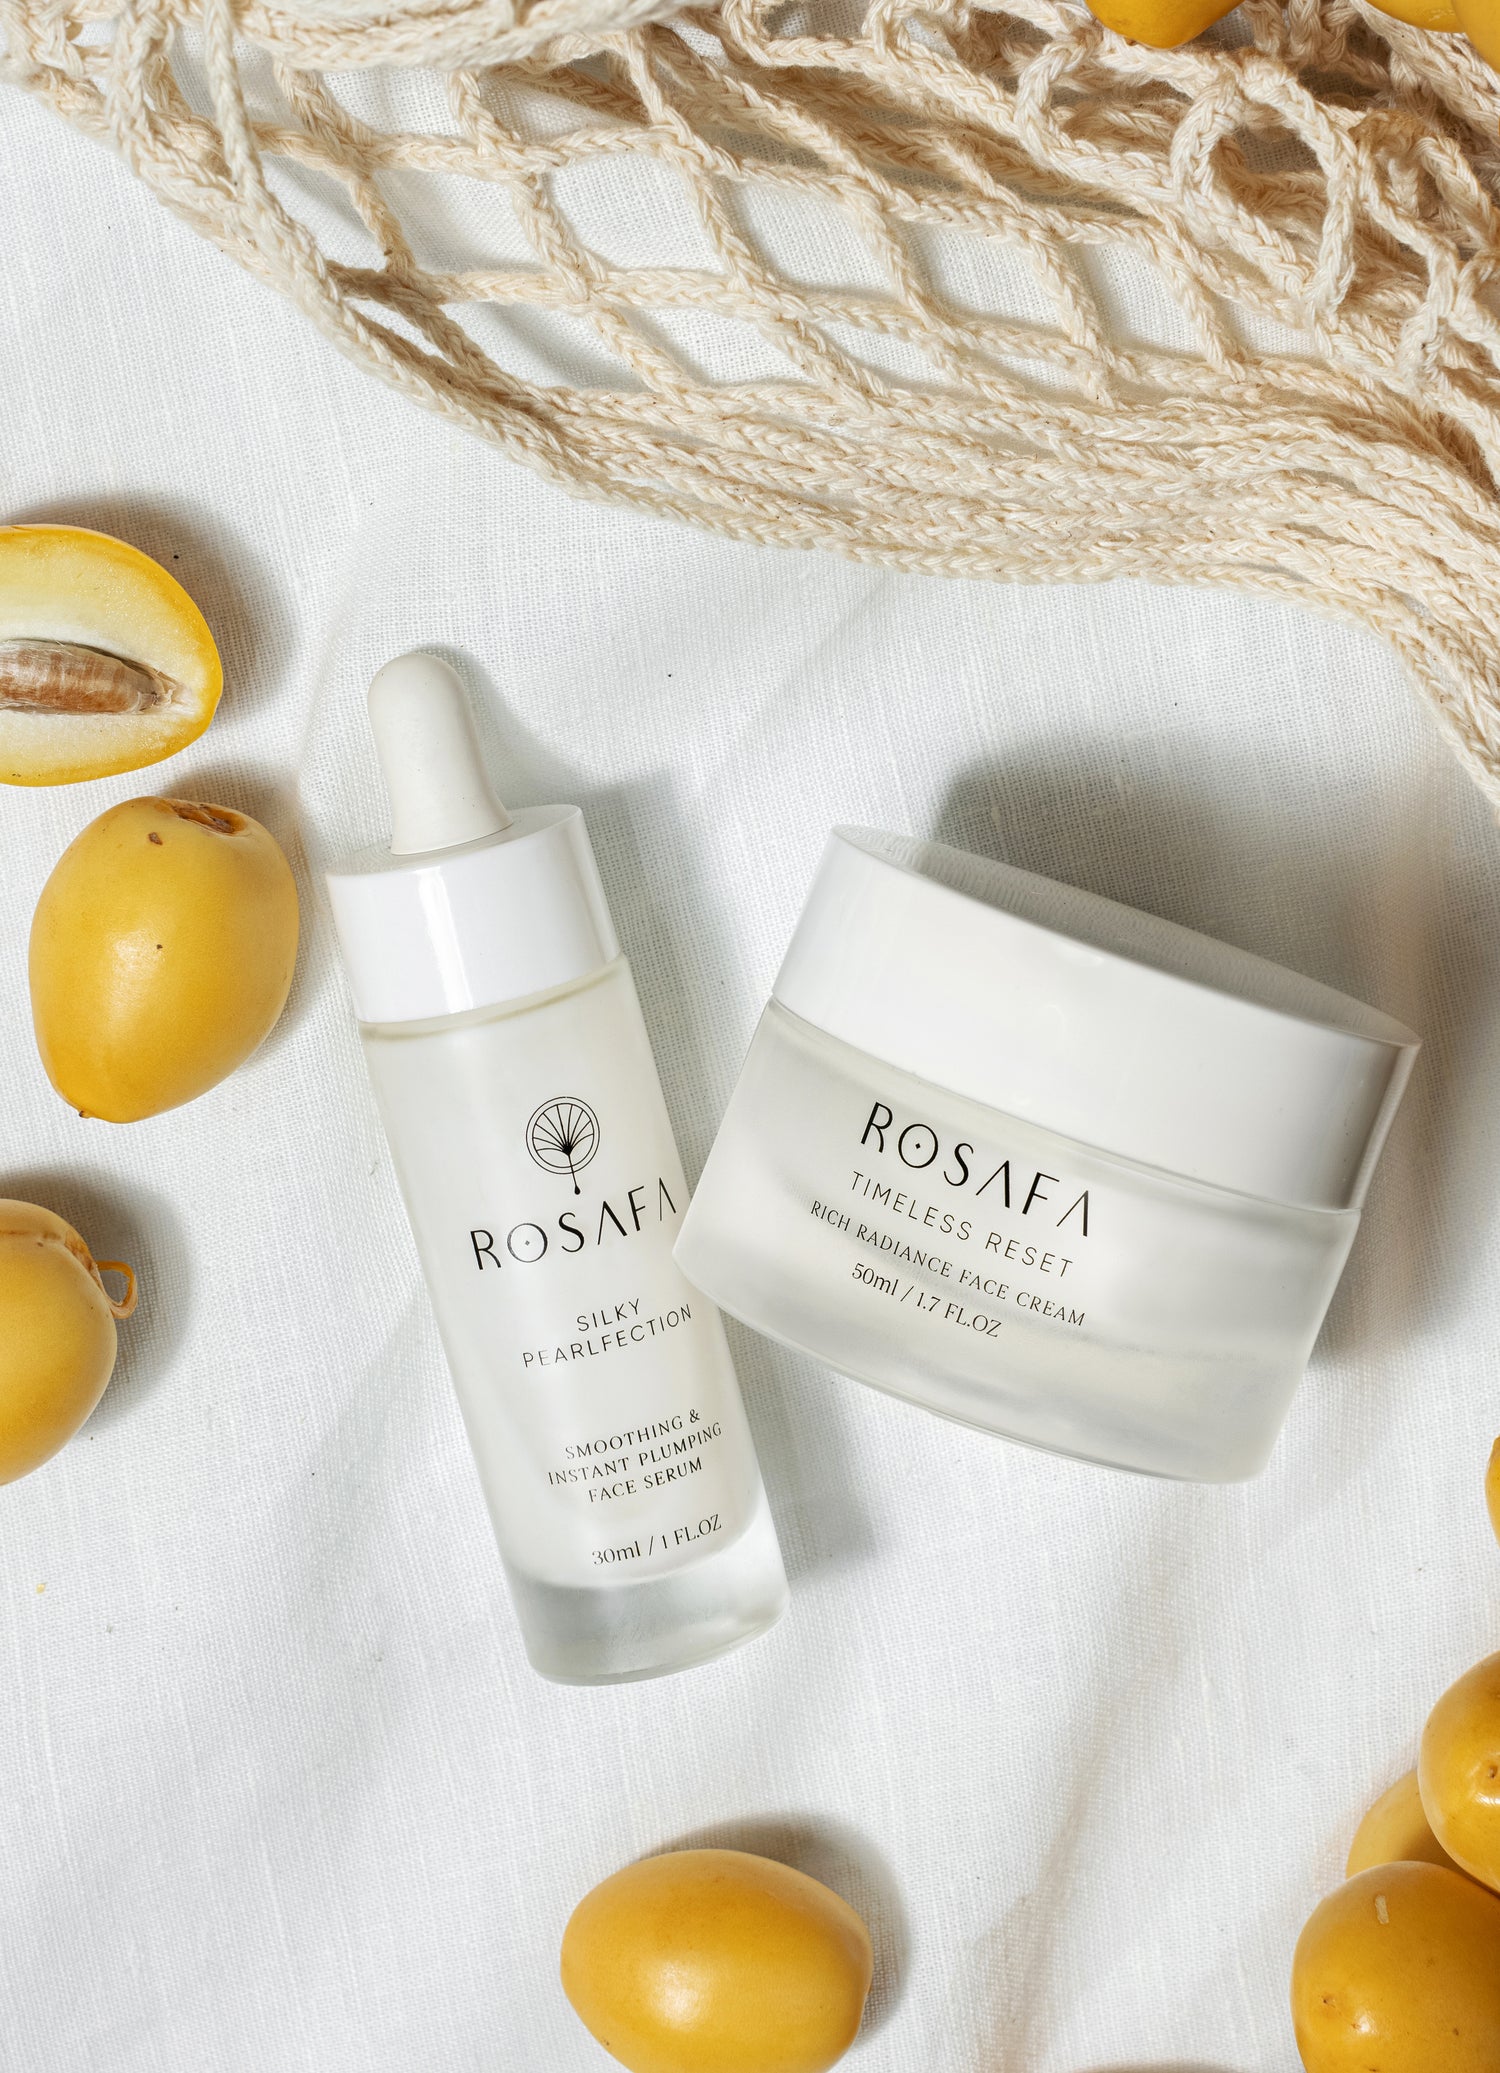 timeless reset rich radiance face cream and silky pearlfection smoothing & instant plumping face serum